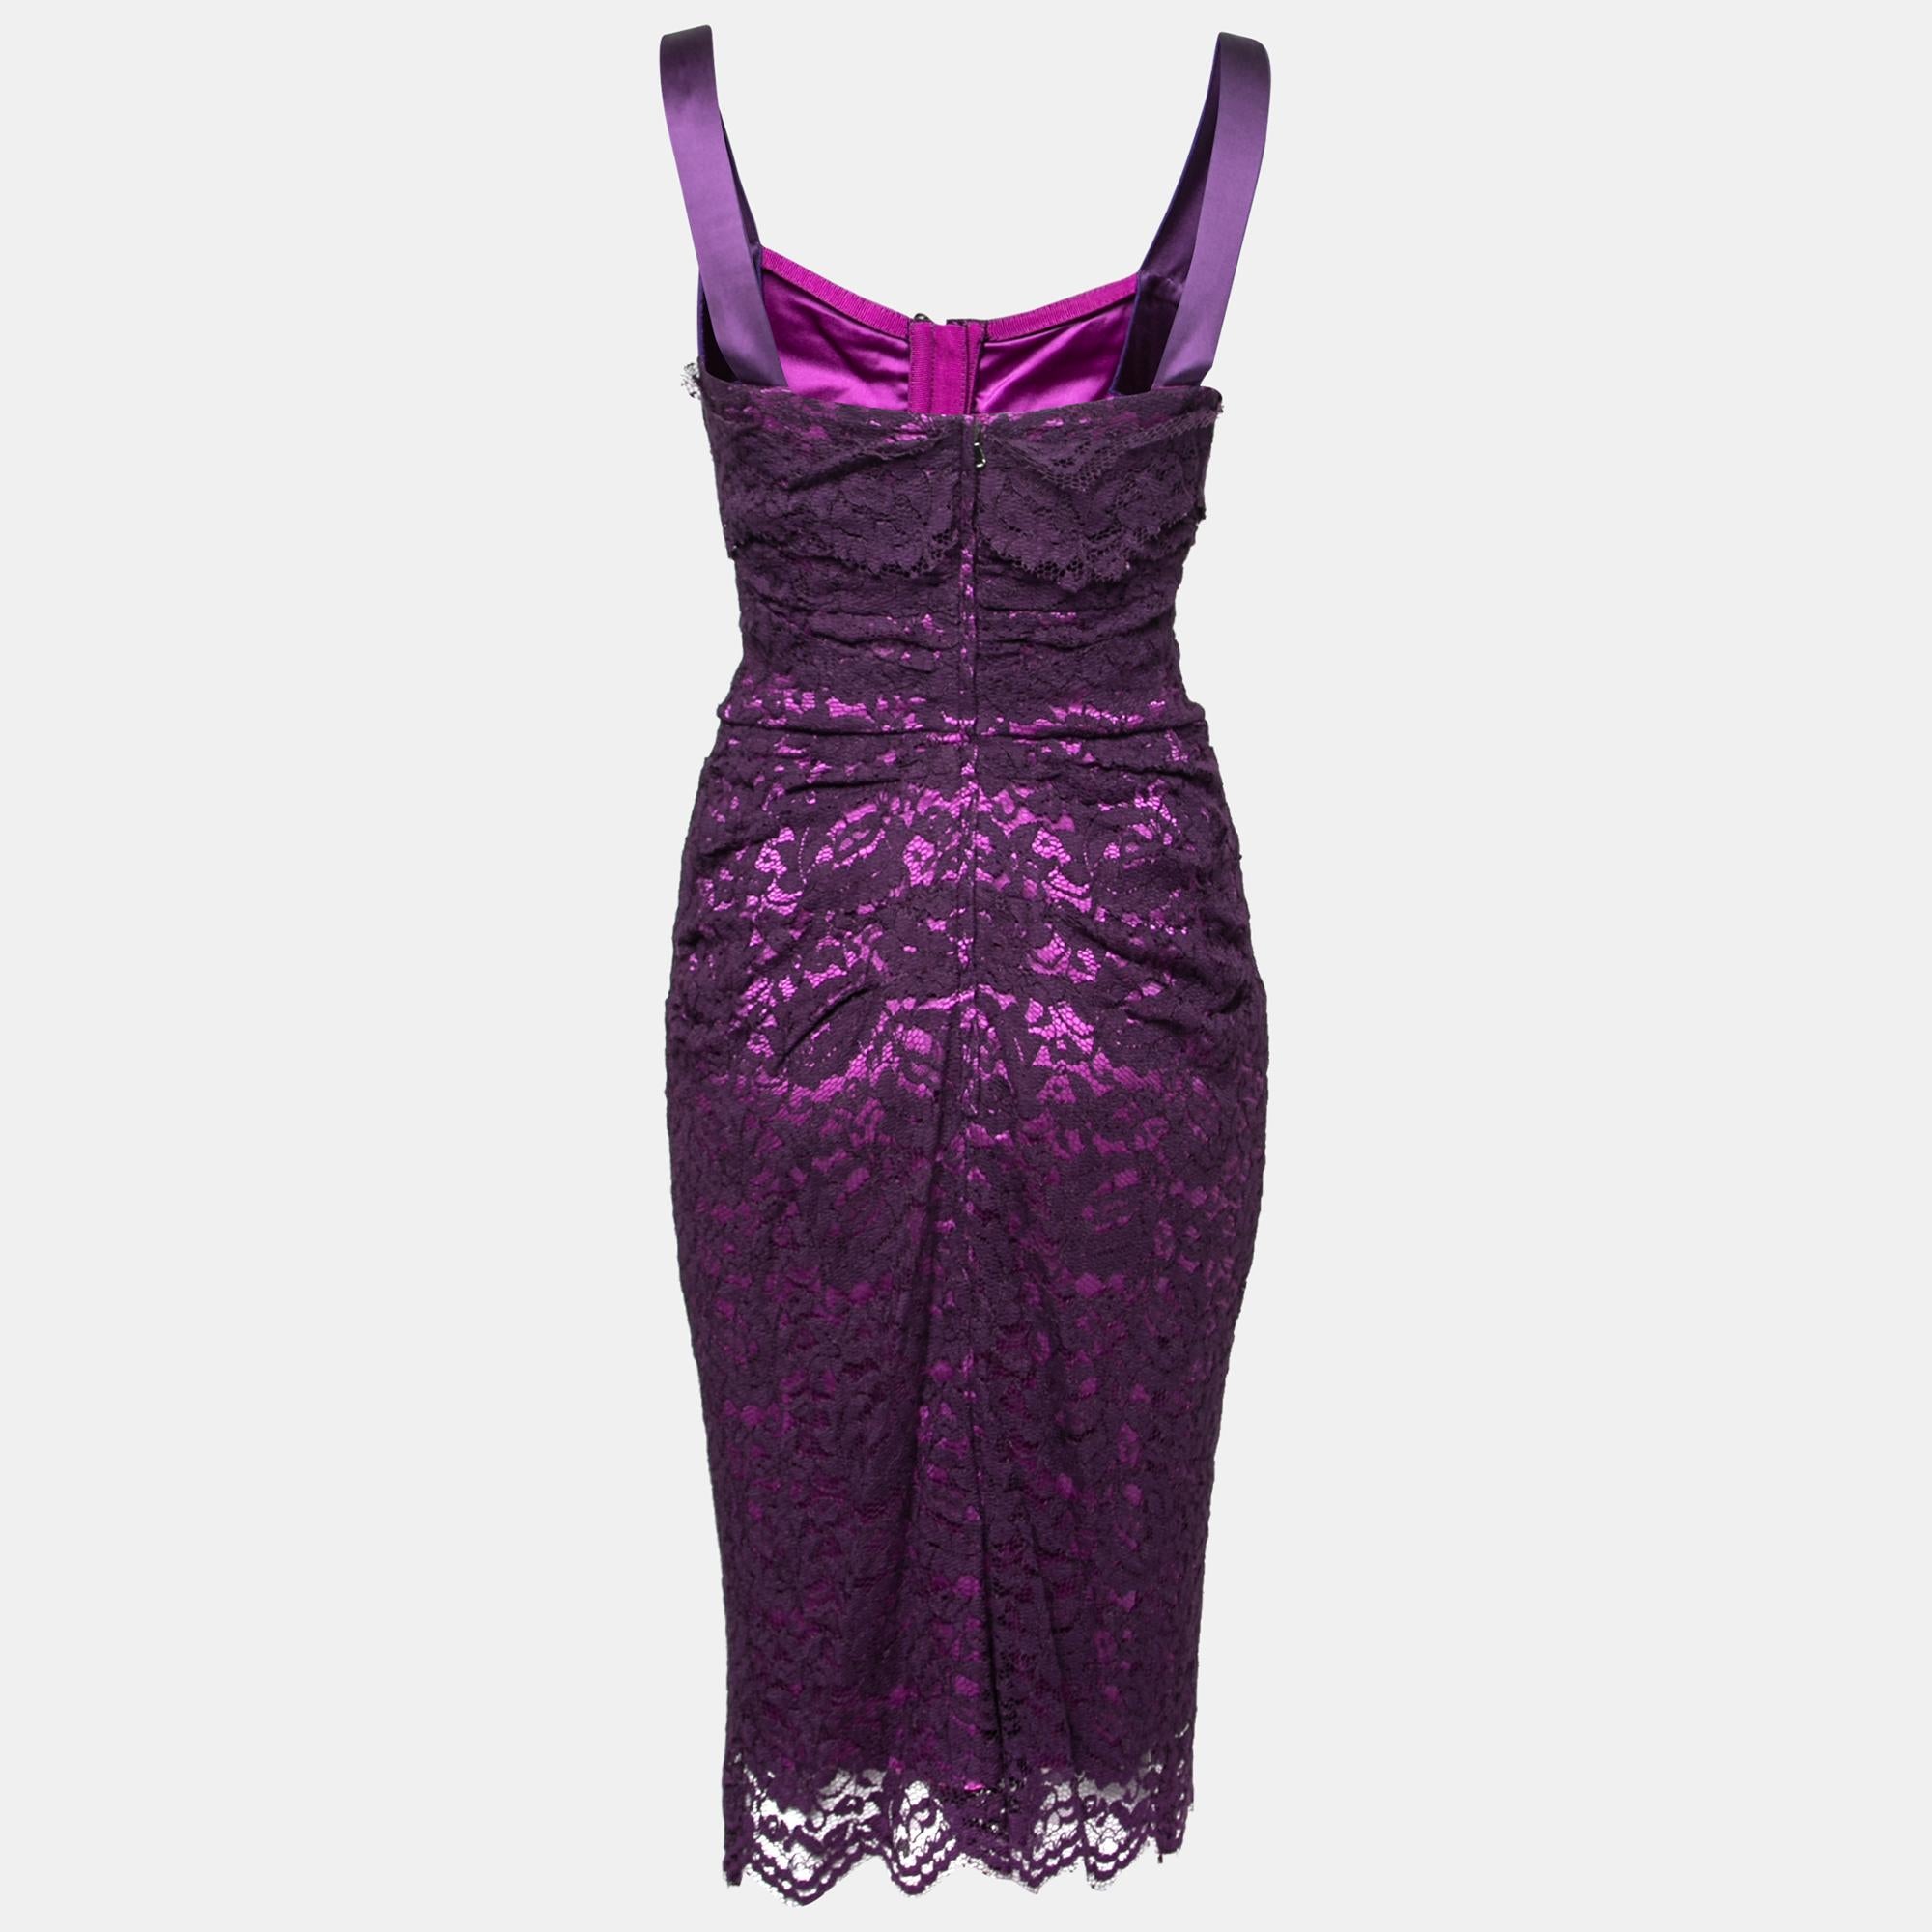 With this lovely purple dress, Dolce & Gabbana makes sure that you always have the best outfit to flaunt your feminal beauty and grace in. Defined with lacy edgings and a sleek silhouette, this sleeveless dress emphasizes your beauty most elegantly.